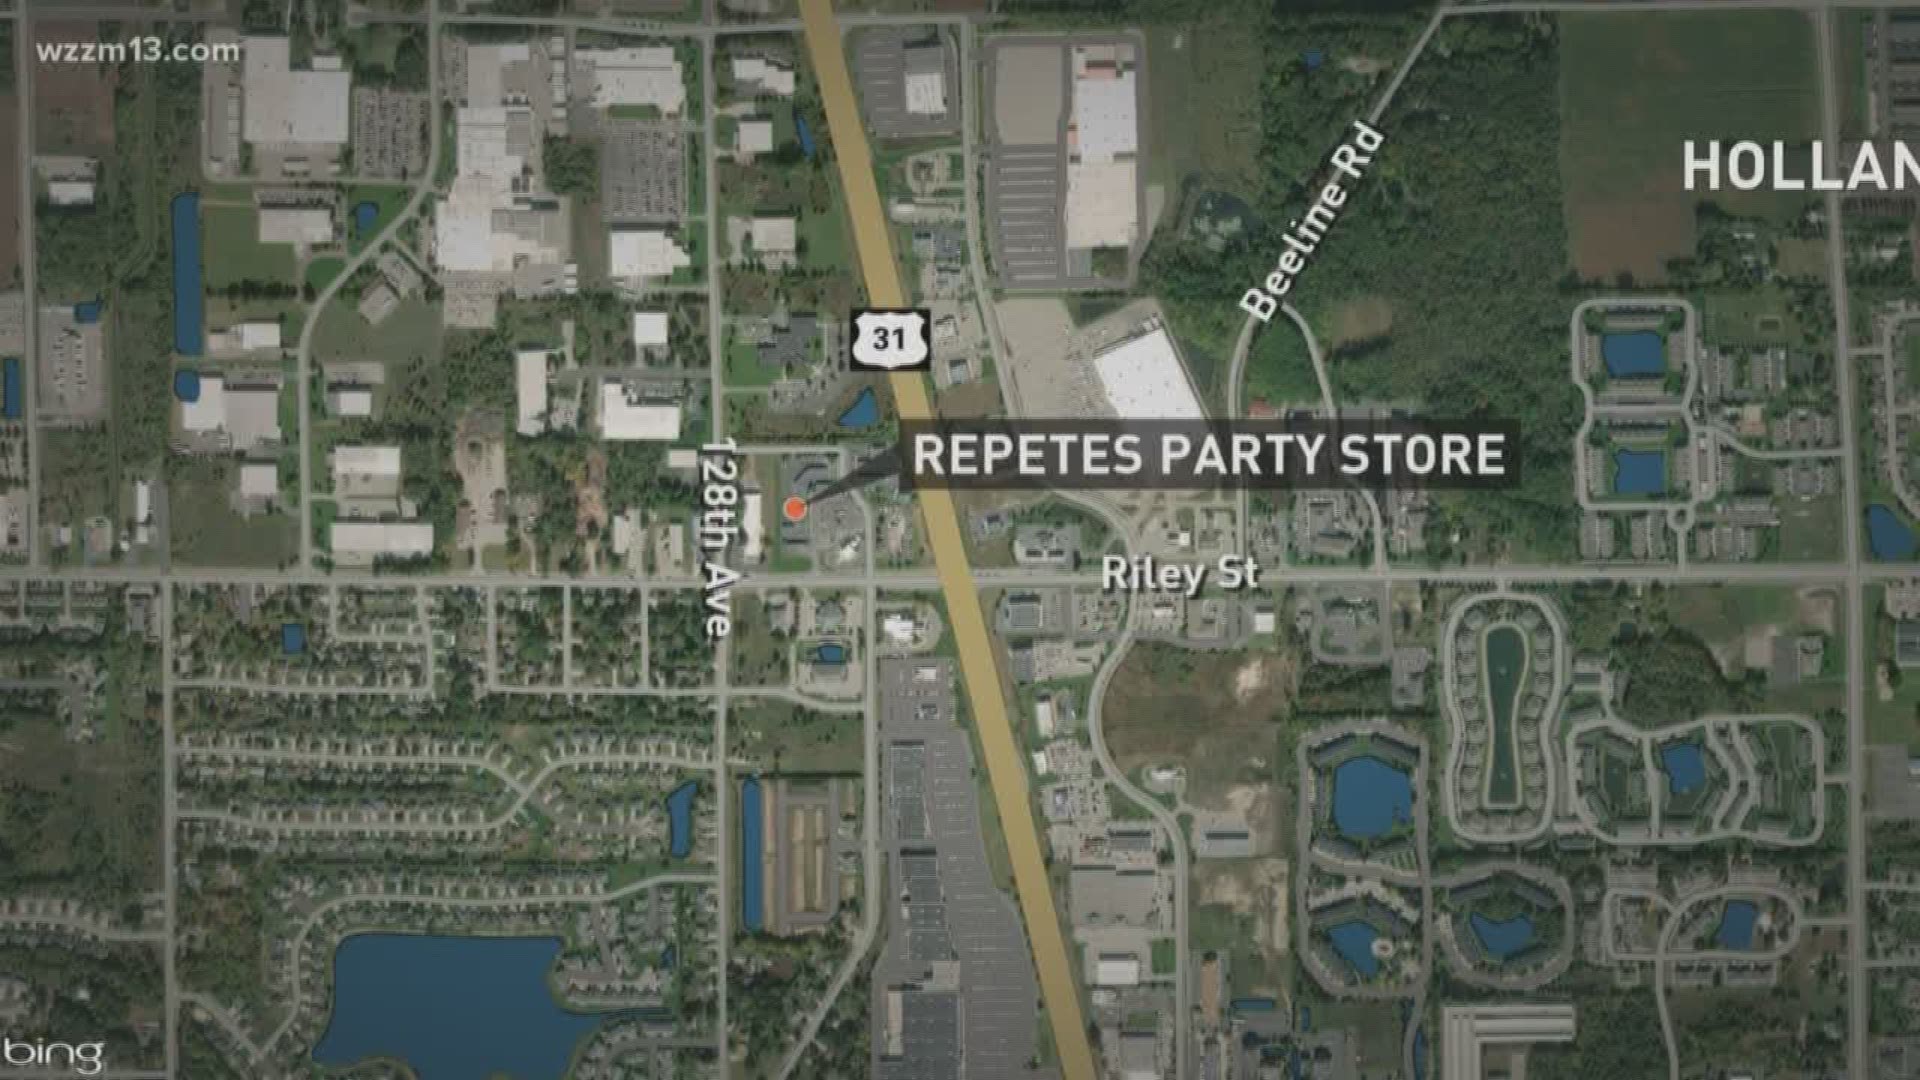 Authorities are looking for the man who held up Re Pete's Party Story in Holland over the weekend.